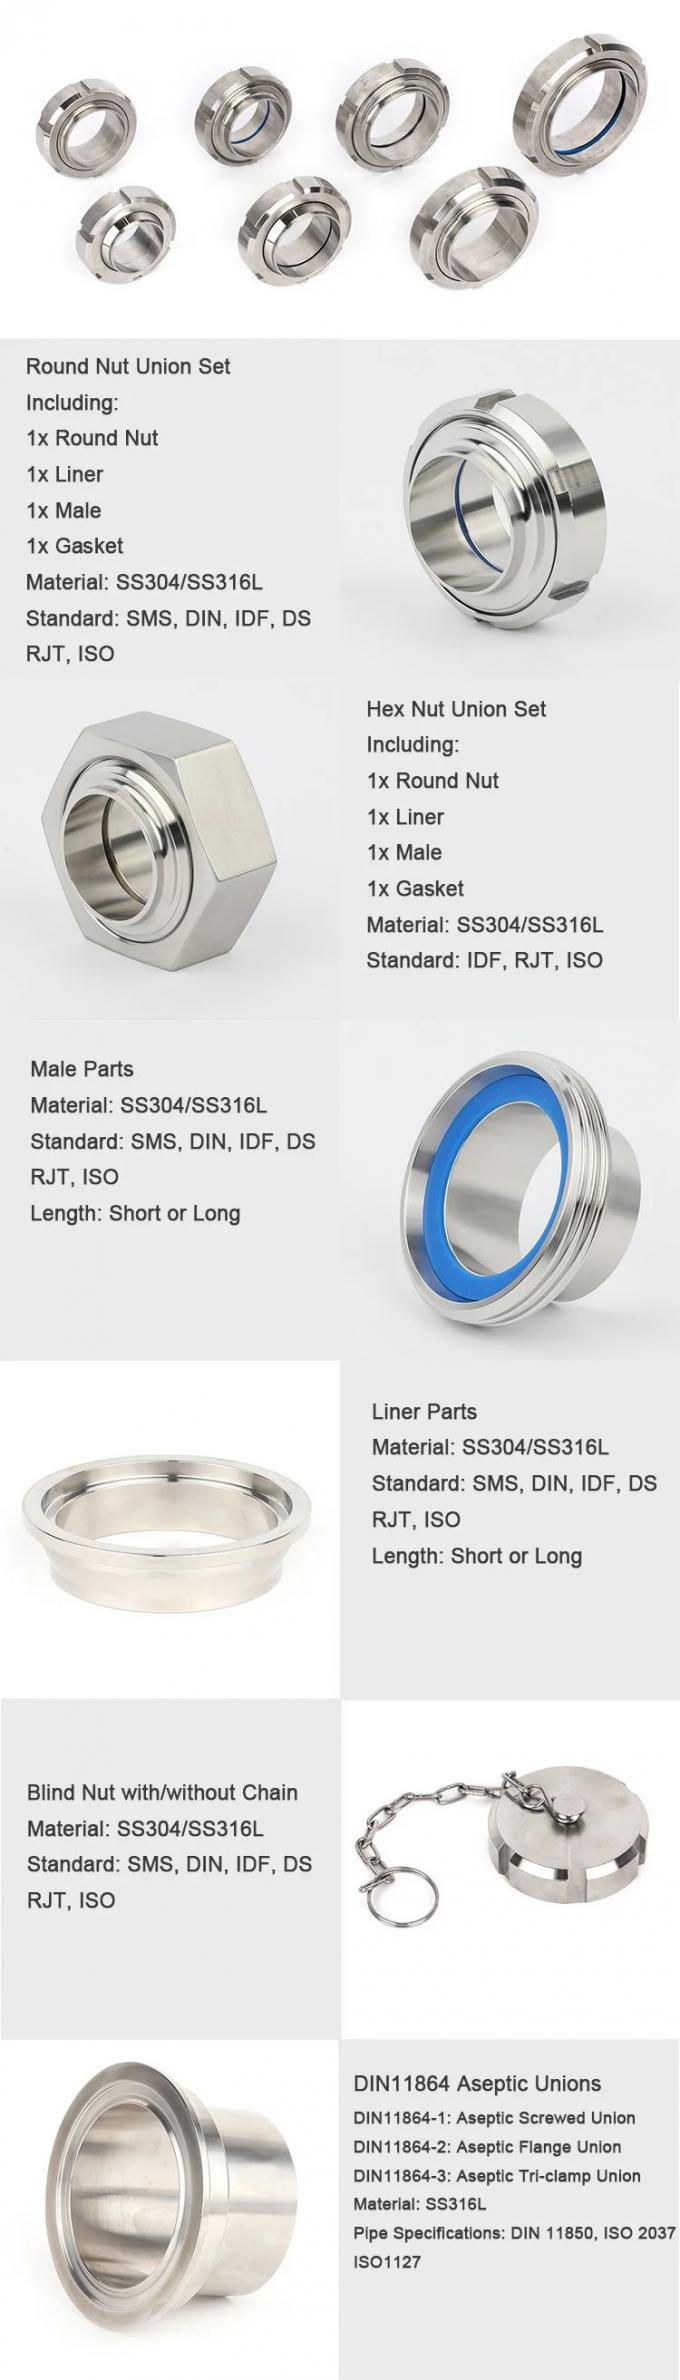 Sanitary Stainless Steel 304 316L Food Grade Union with Round Nut Pipe Fittings 0